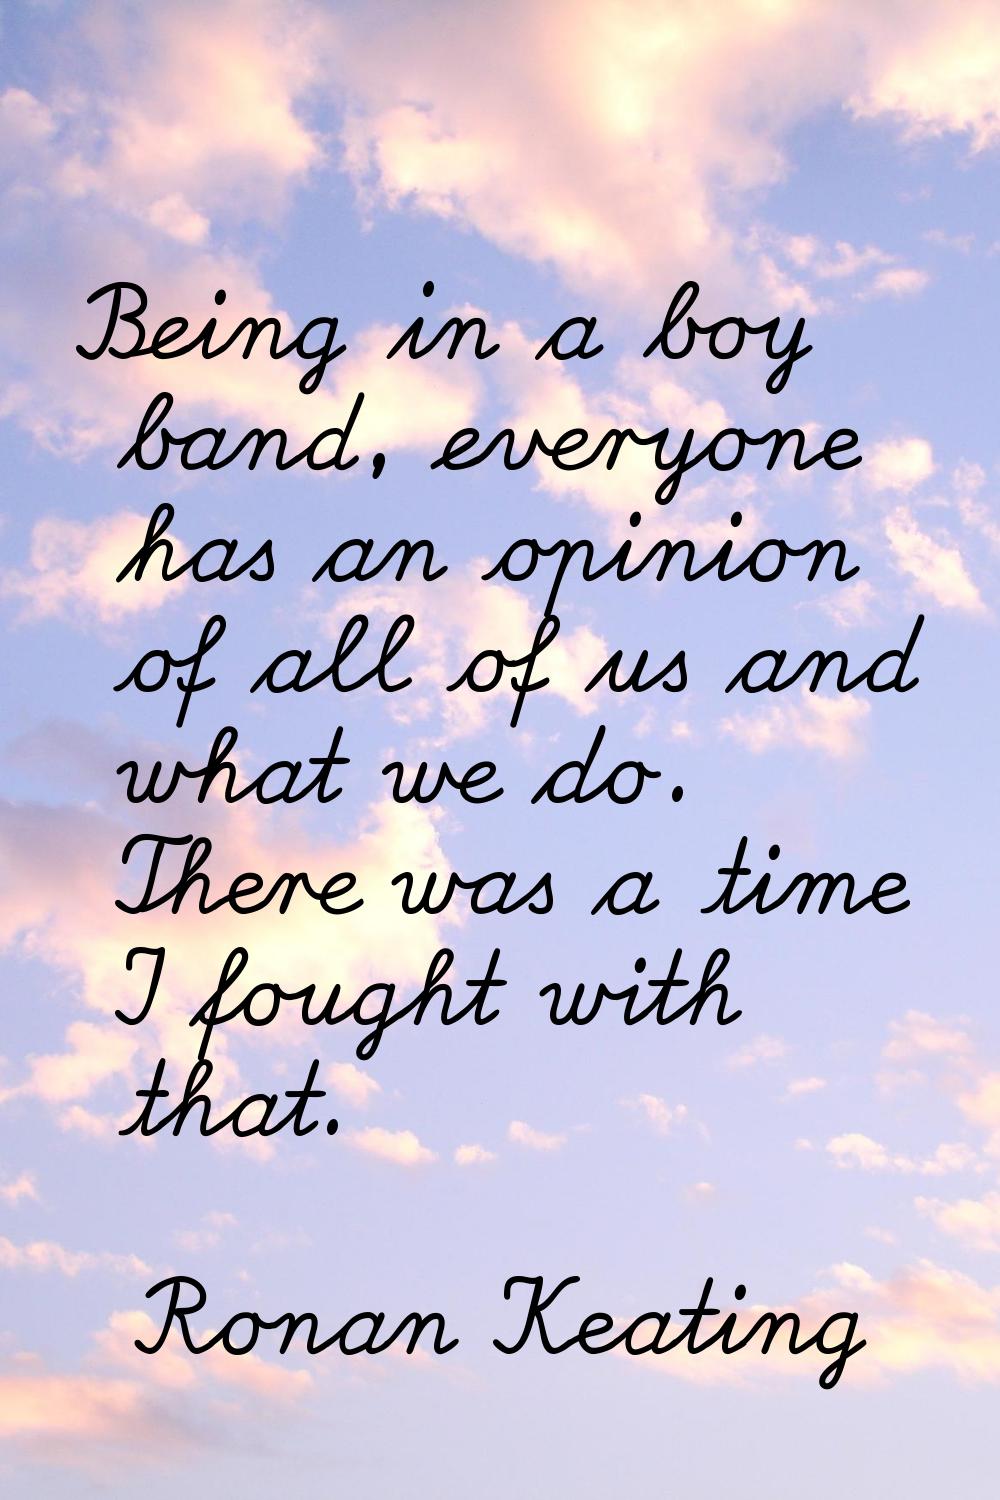 Being in a boy band, everyone has an opinion of all of us and what we do. There was a time I fought